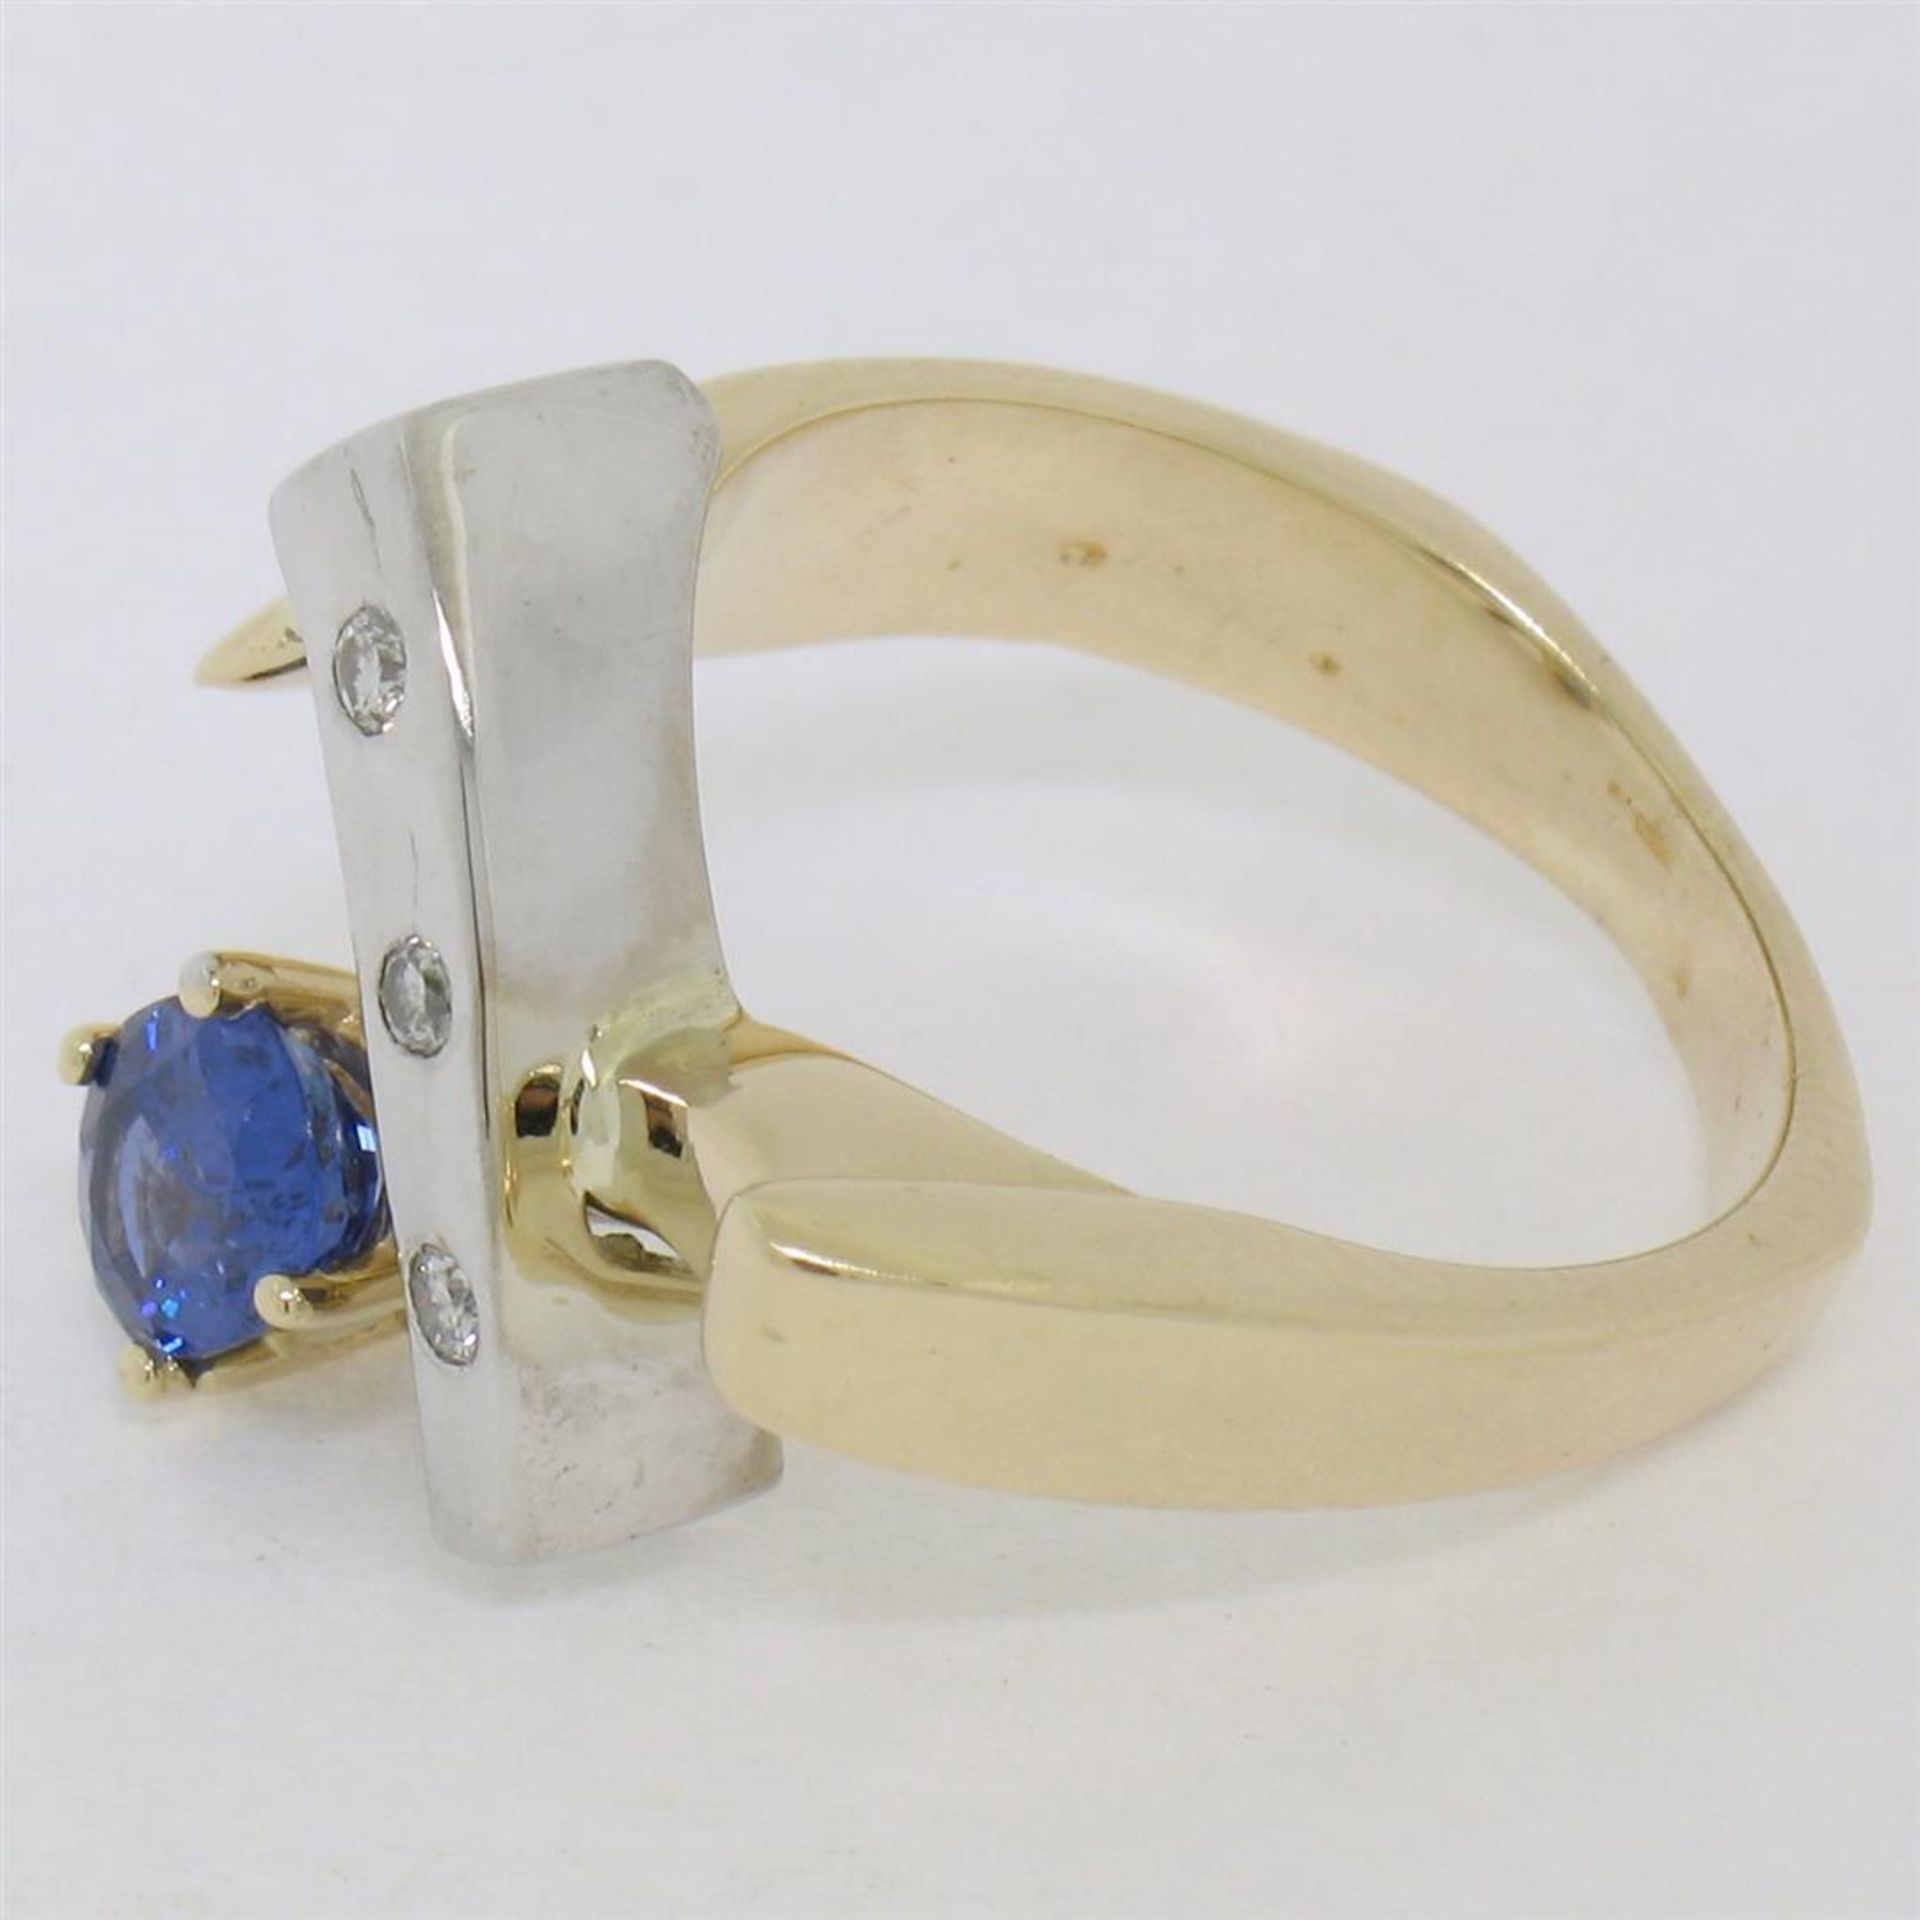 Two Tone 14K Gold 0.98ctw QUALITY Sapphire Solitaire Ring w/ 3 Diamond Accents - Image 2 of 7